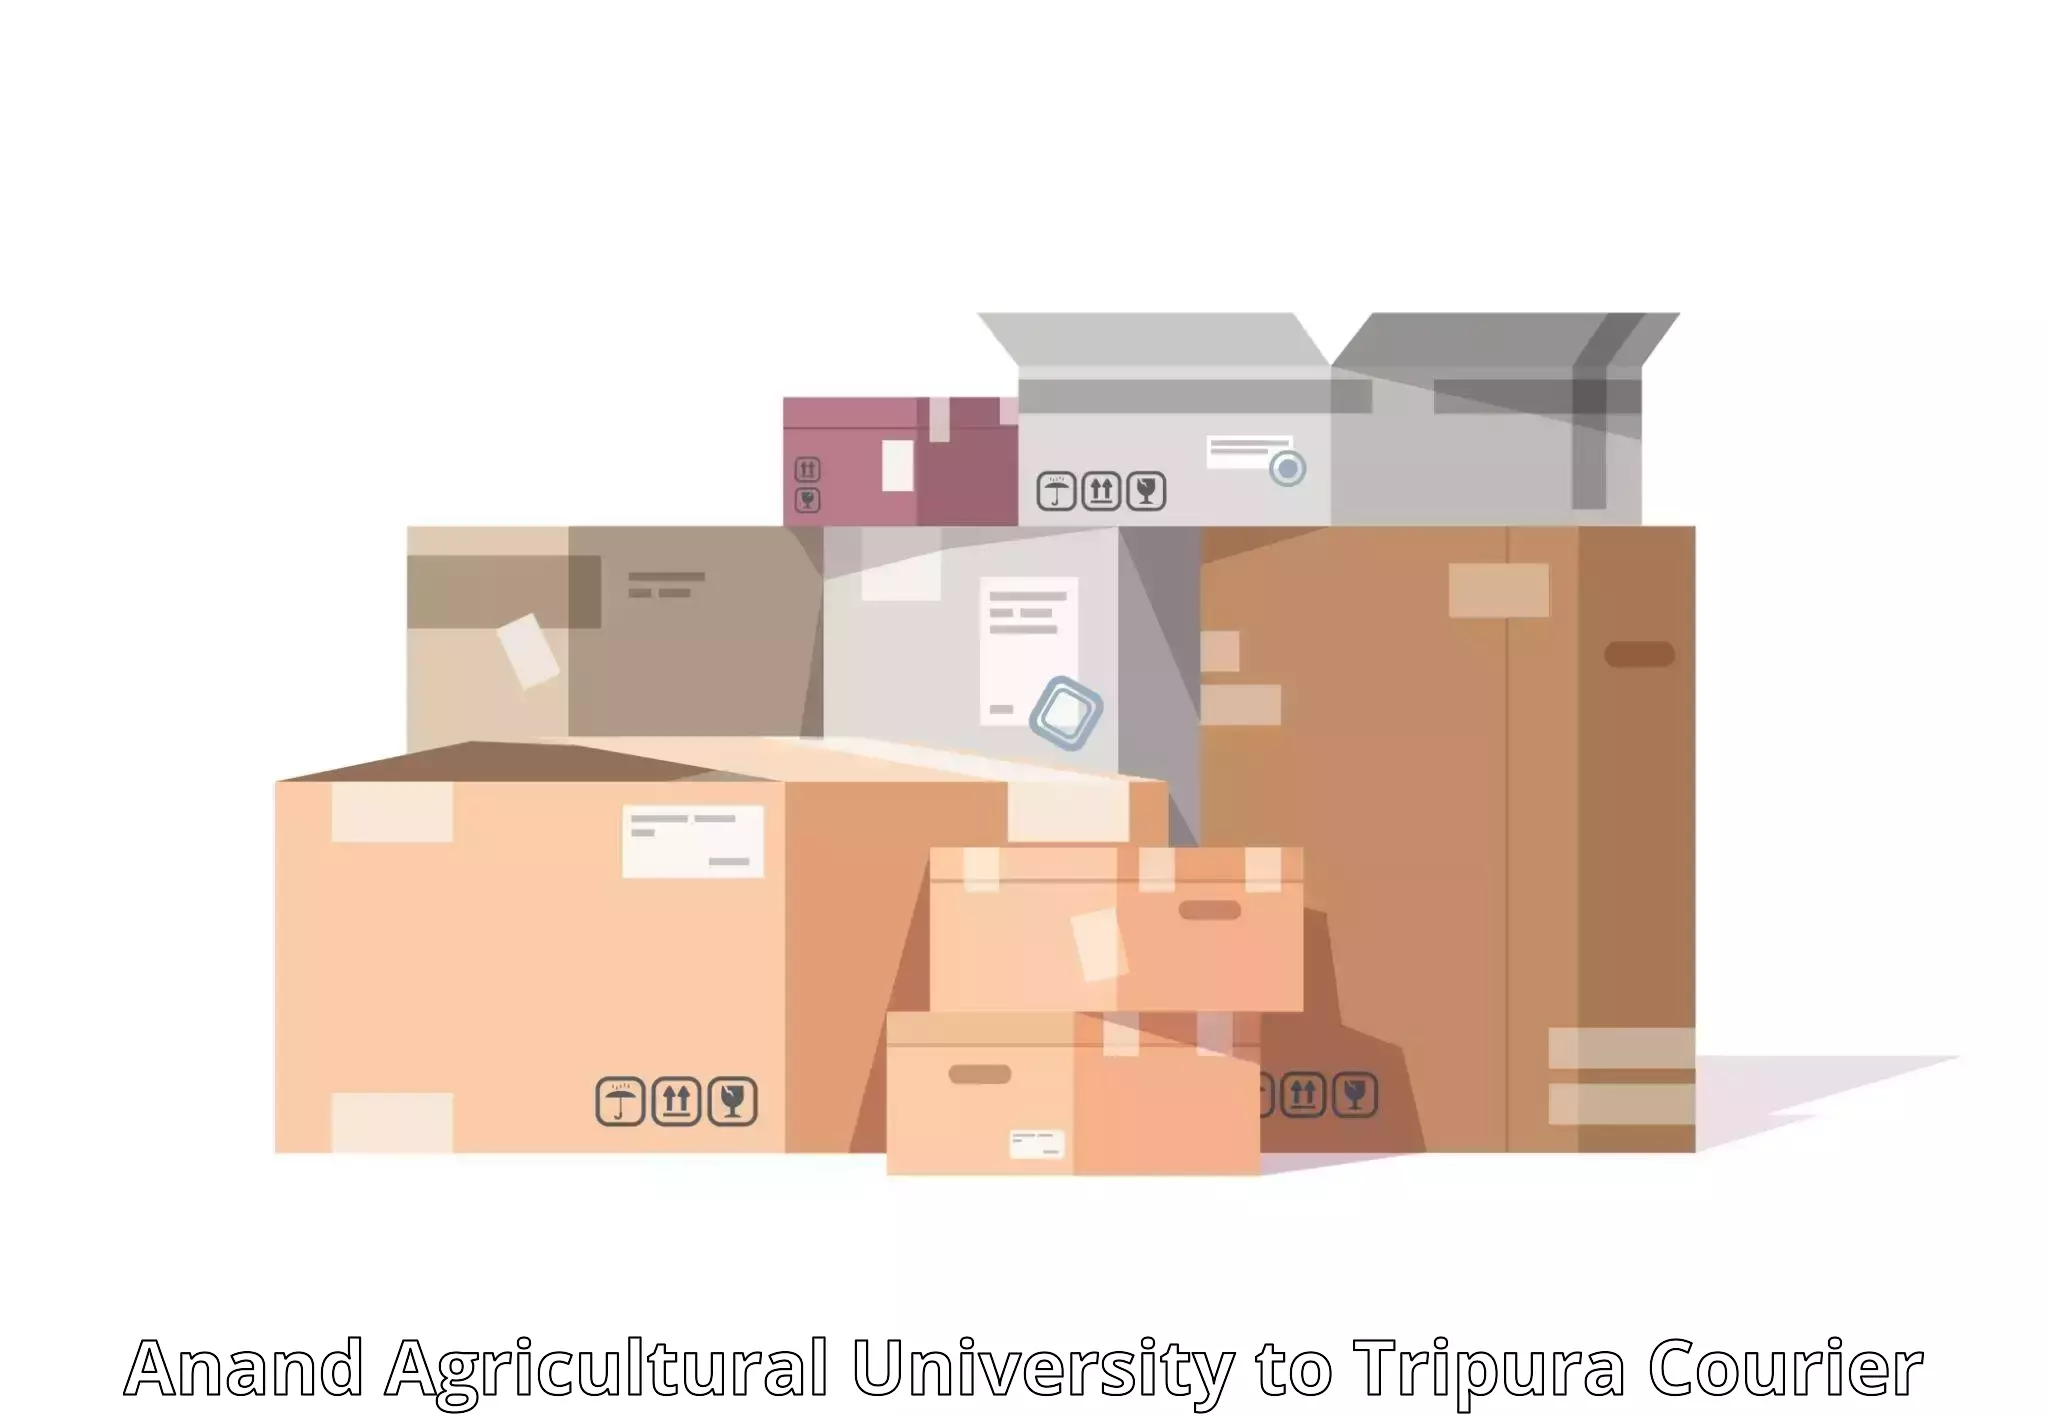 Global shipping networks Anand Agricultural University to Tripura